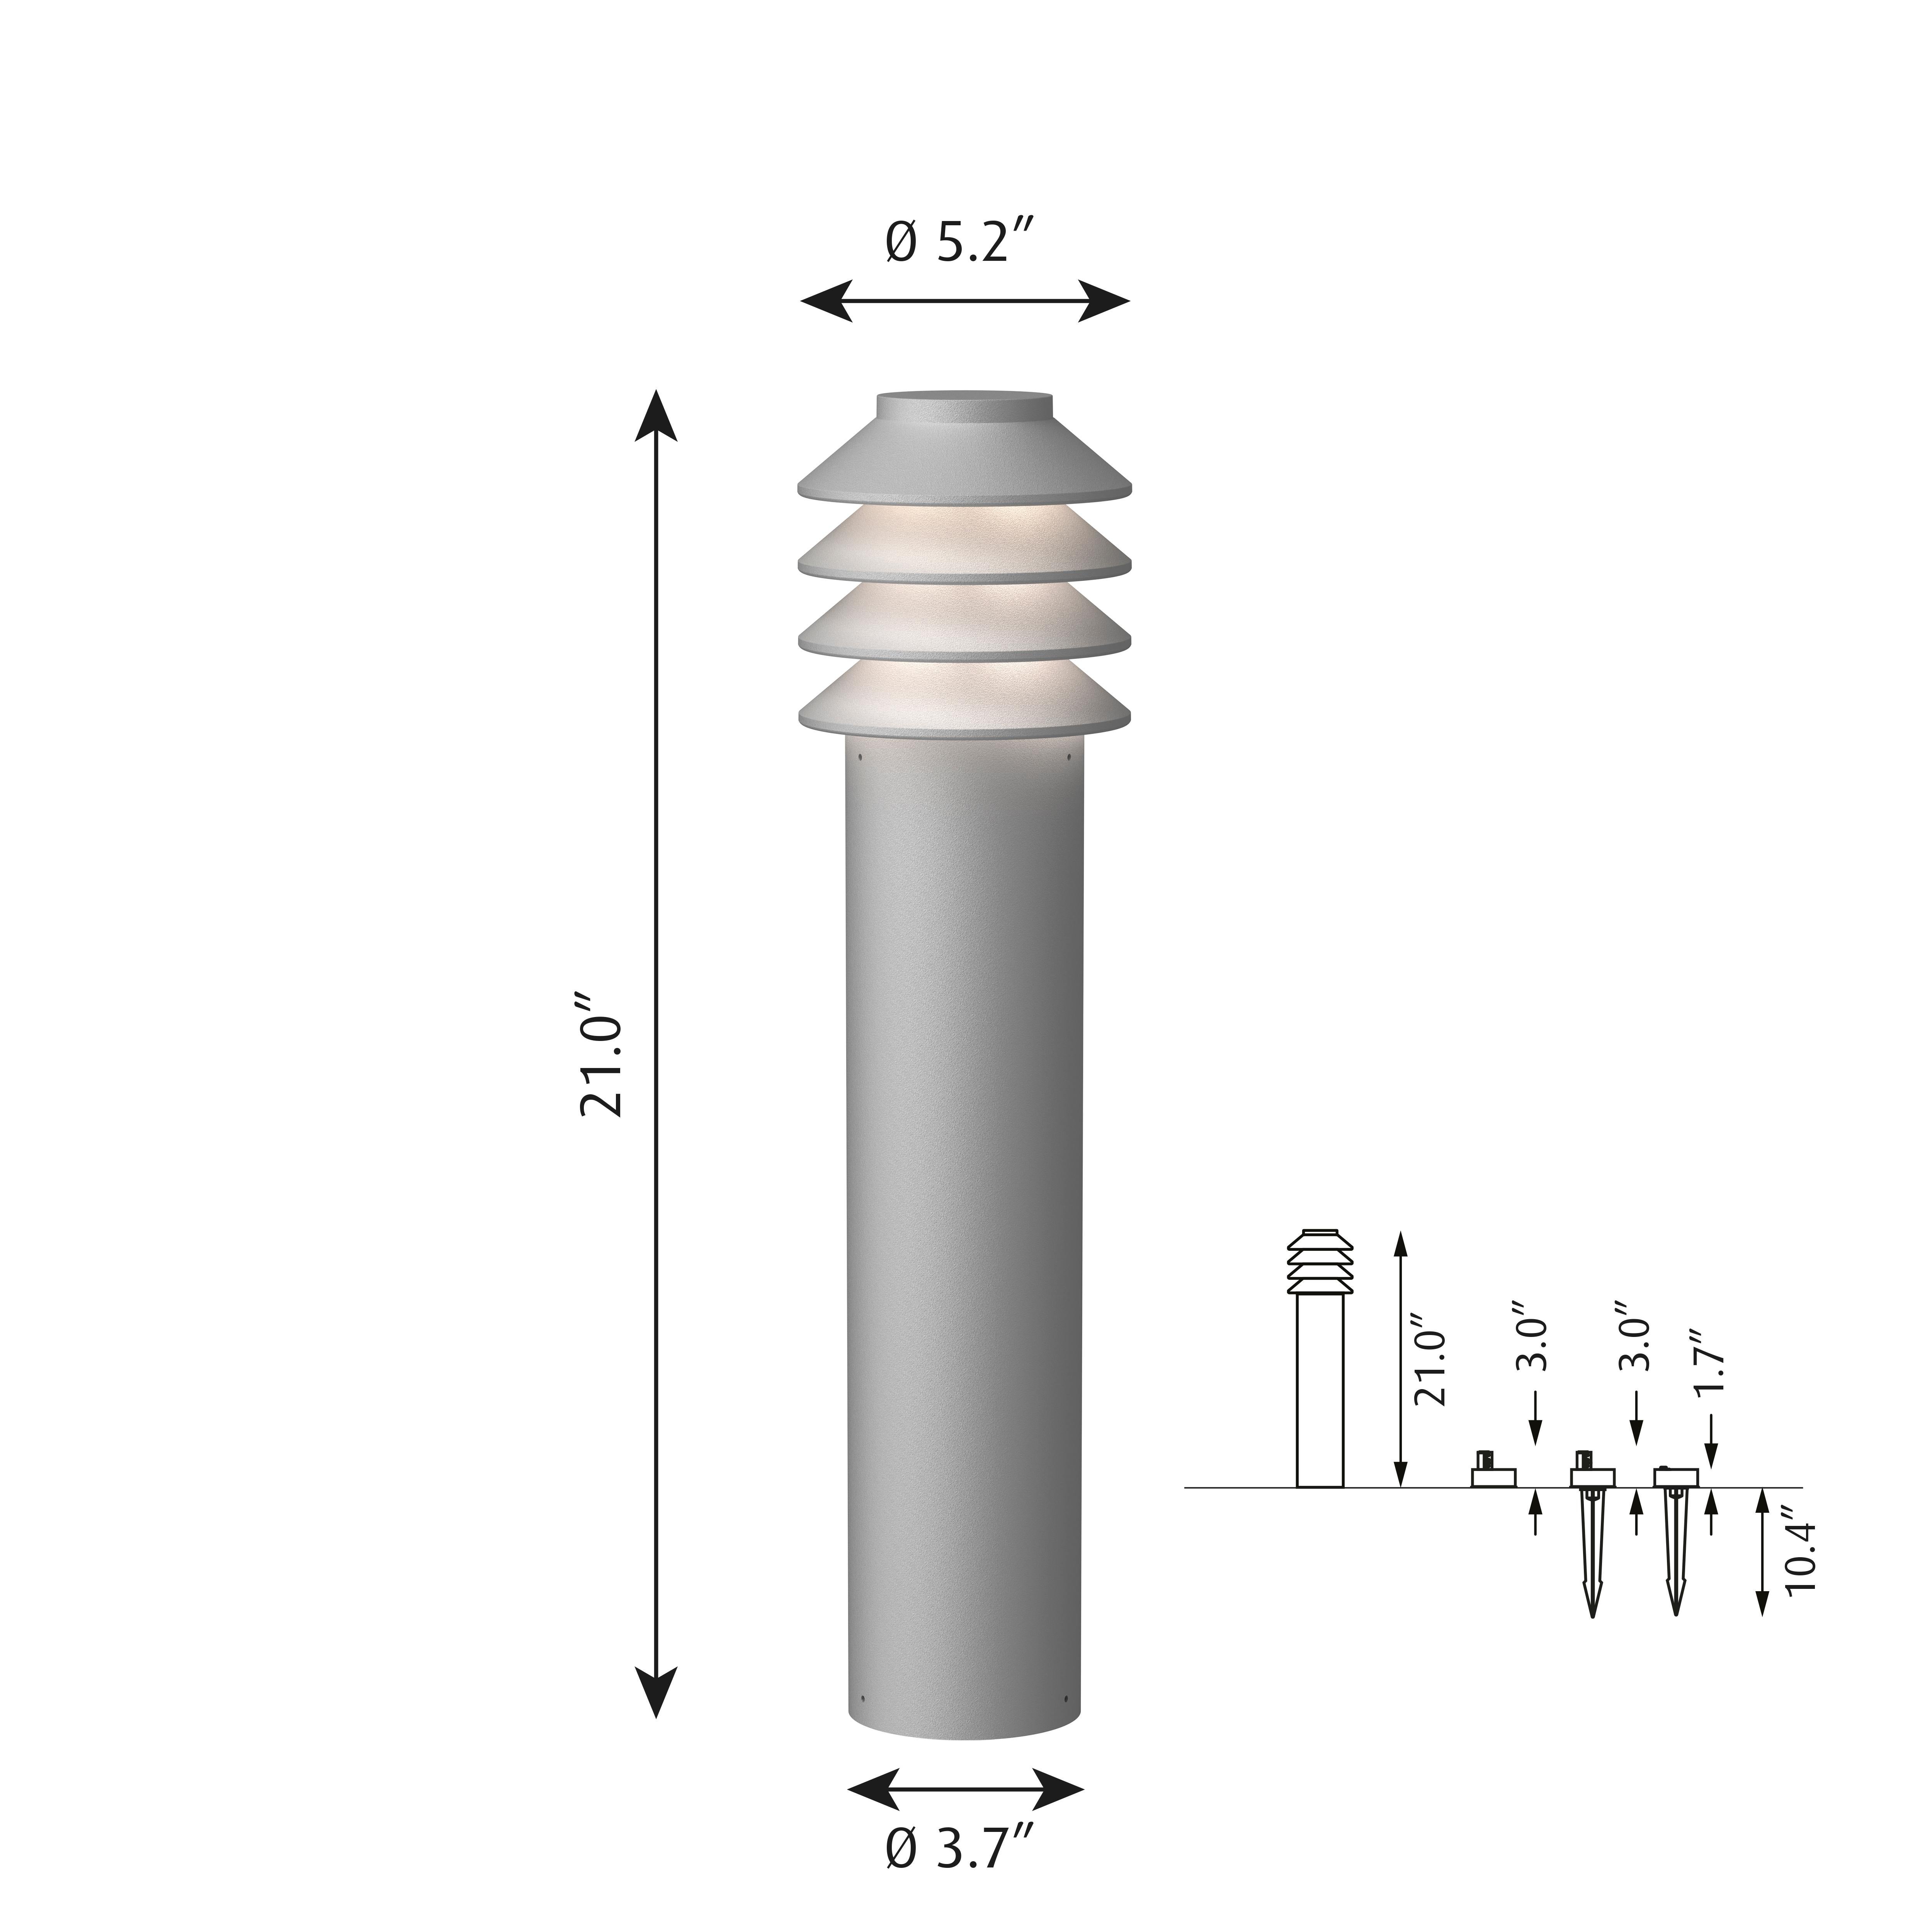 'Bysted Garden Long' Outdoor Bollard Light for Louis Poulsen in Natural Aluminum In New Condition For Sale In Glendale, CA